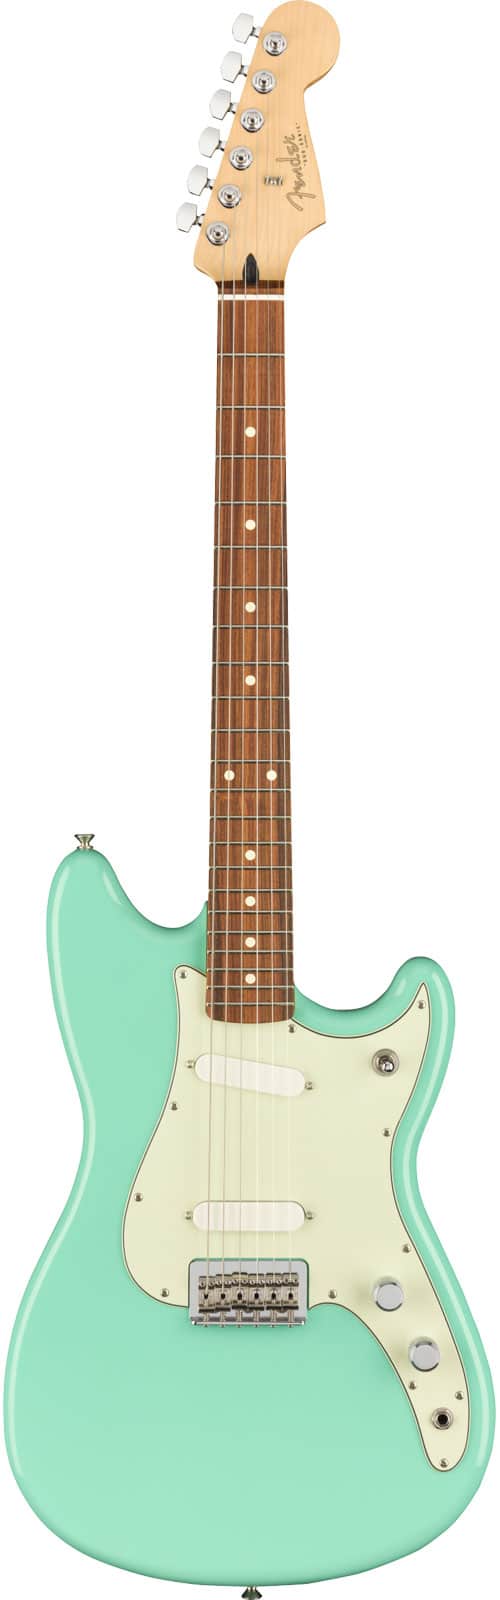 FENDER MEXICAN PLAYER DUO SONIC PF, SEAFOAM GREEN